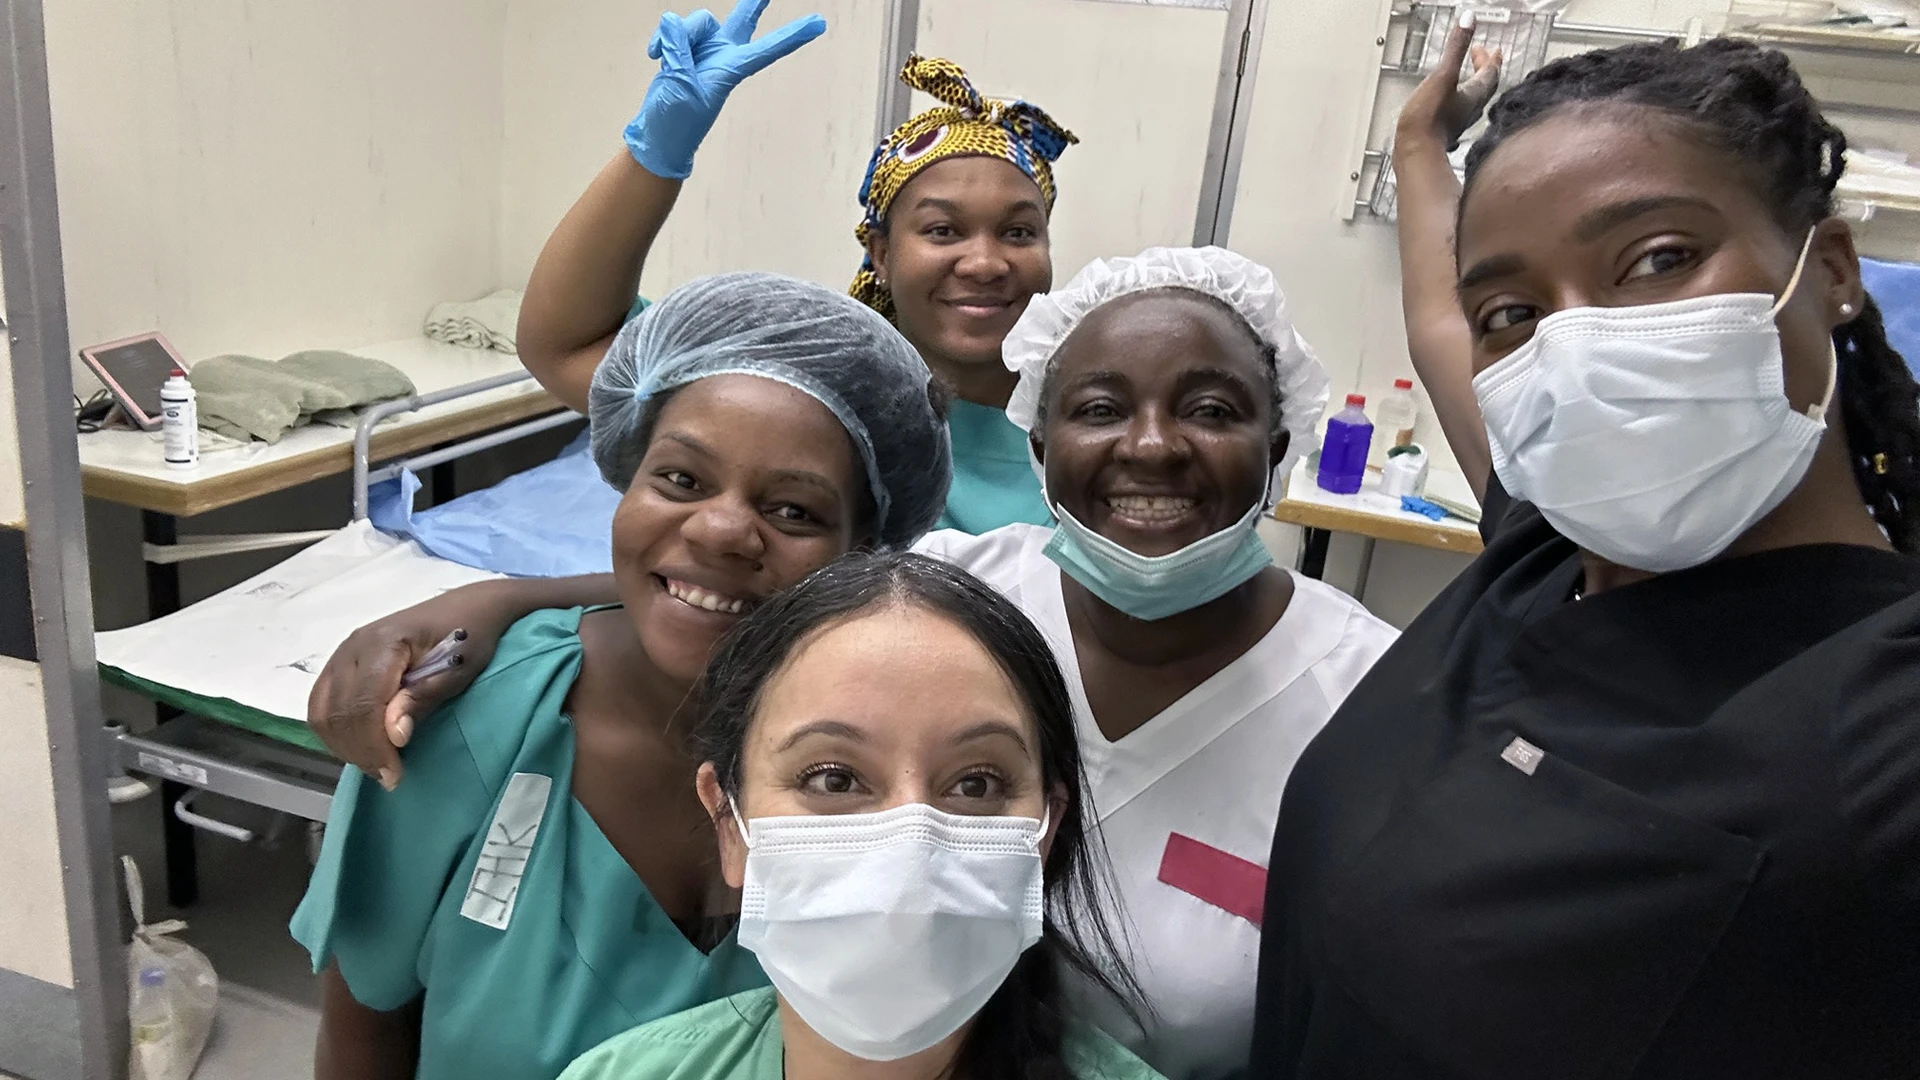 Dr. Zakhary (bottom center) and Dr. Louissaint (right) worked together with a local Namibian healthcare team not just to treat patients, but also on training and education.